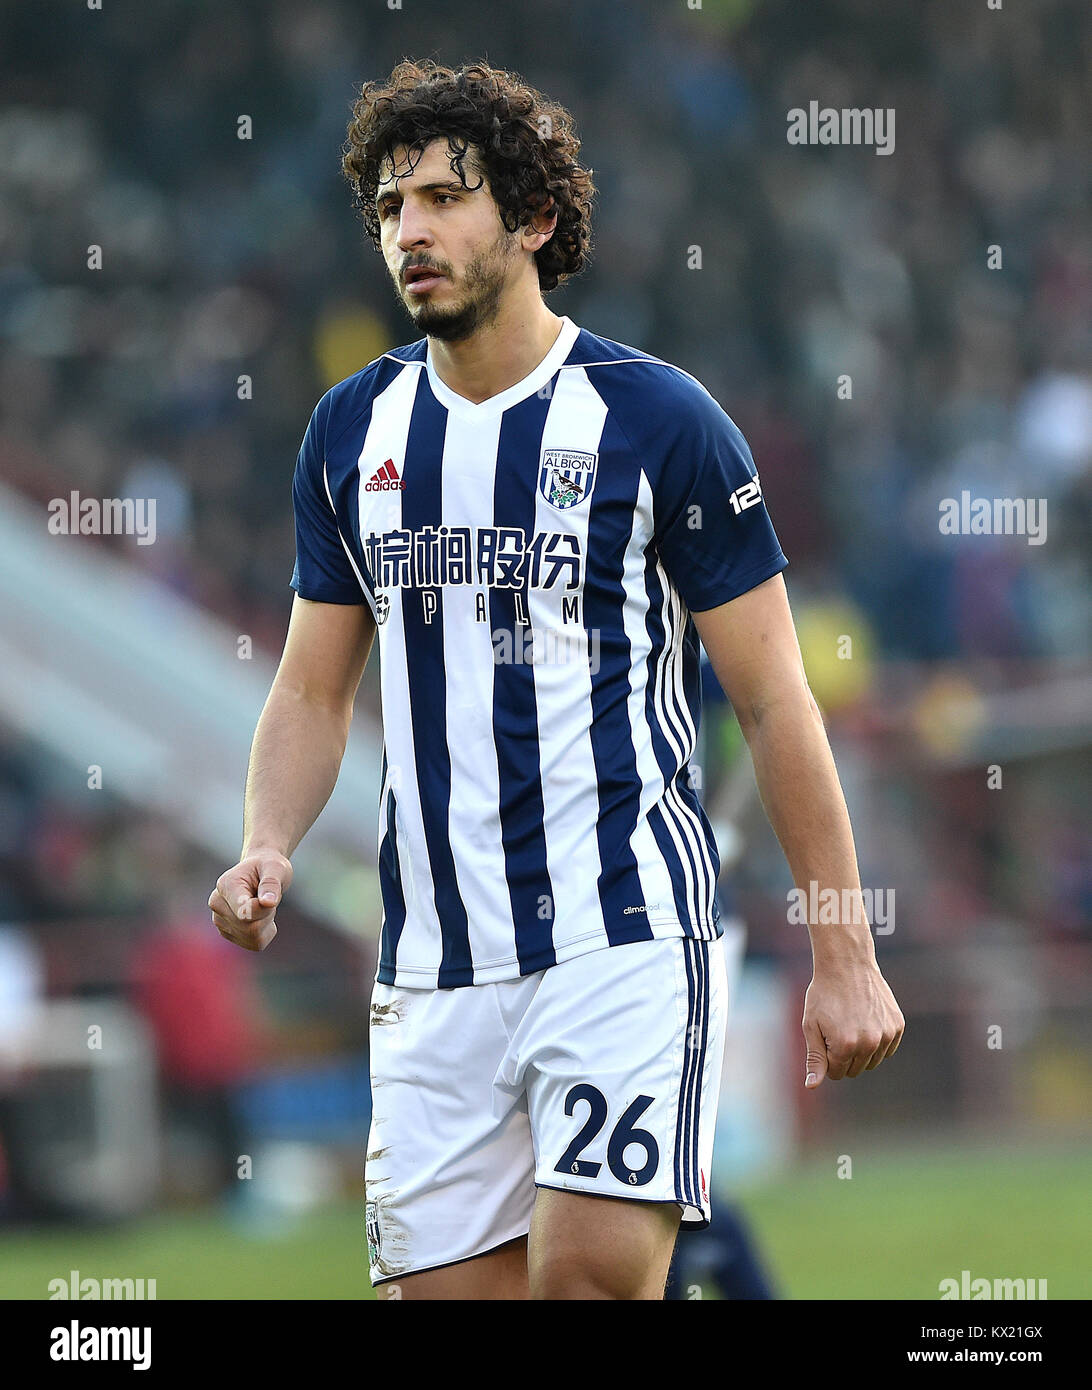 West Bromwich Albion's Ahmed Hegazy during the FA Cup, third round match at St James' Park, Exeter. PRESS ASSOCIATION Photo. Picture date: Saturday January 6, 2018. See PA story SOCCER Exeter. Photo credit should read: Simon Galloway/PA Wire. RESTRICTIONS: EDITORIAL USE ONLY No use with unauthorised audio, video, data, fixture lists, club/league logos or 'live' services. Online in-match use limited to 75 images, no video emulation. No use in betting, games or single club/league/player publications. Stock Photo